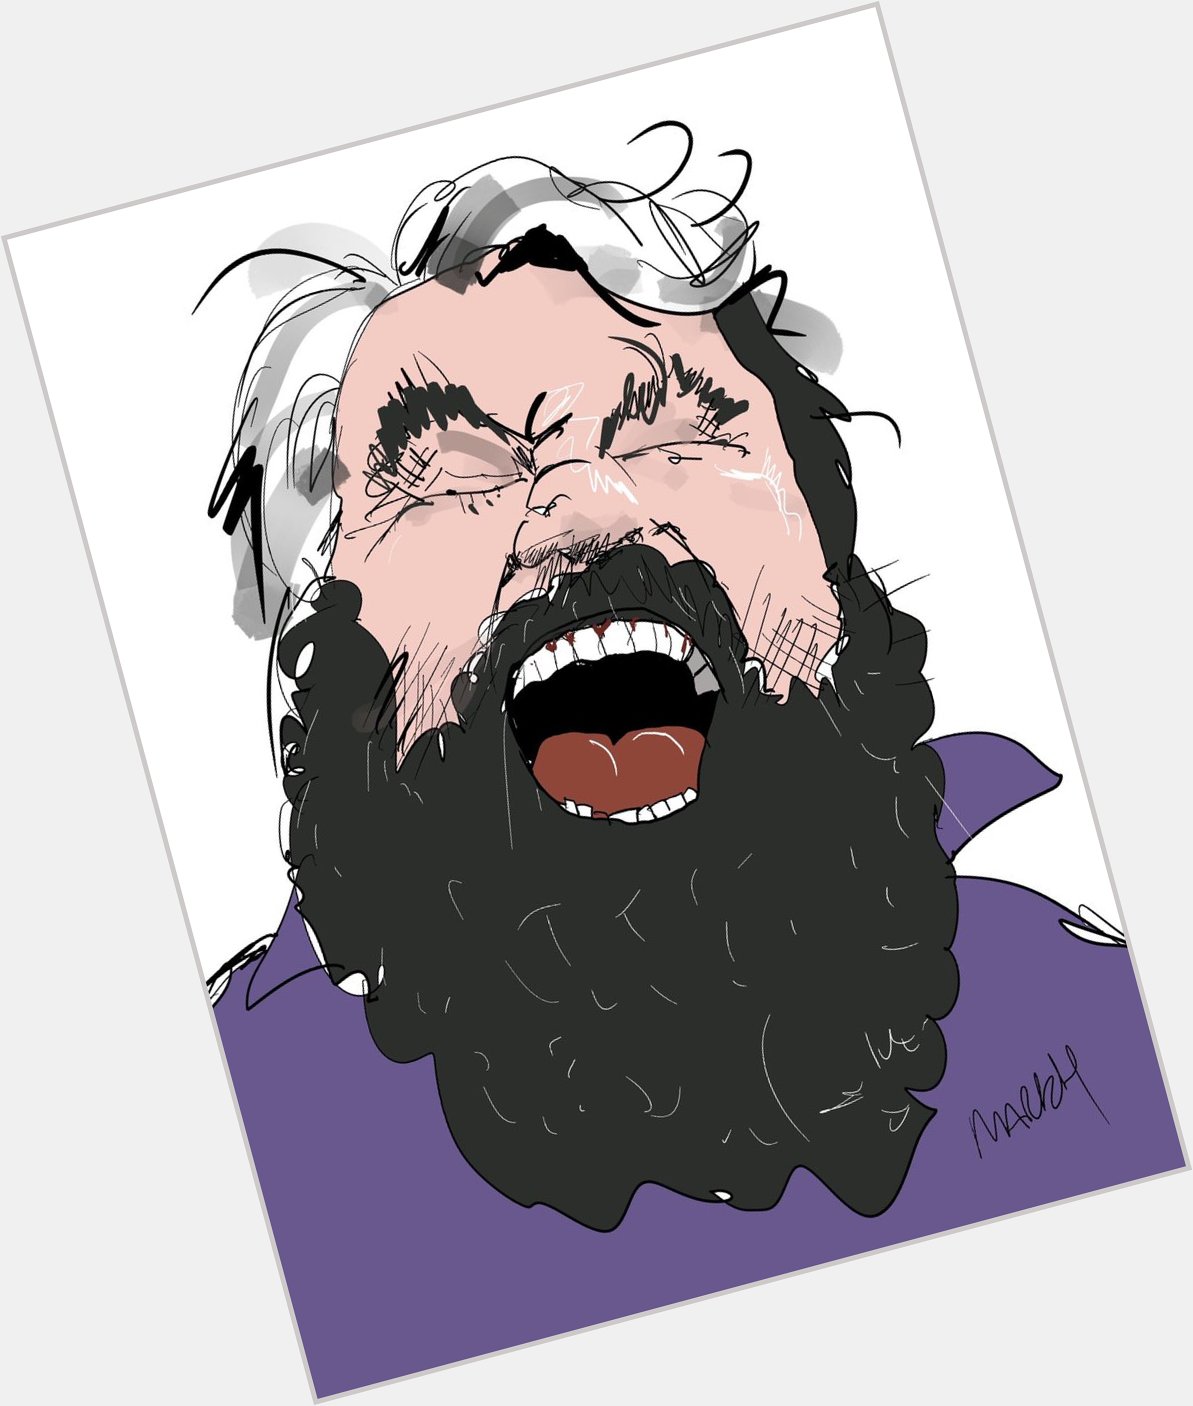 Happy birthday Brian Blessed, a very loud 86 today. 